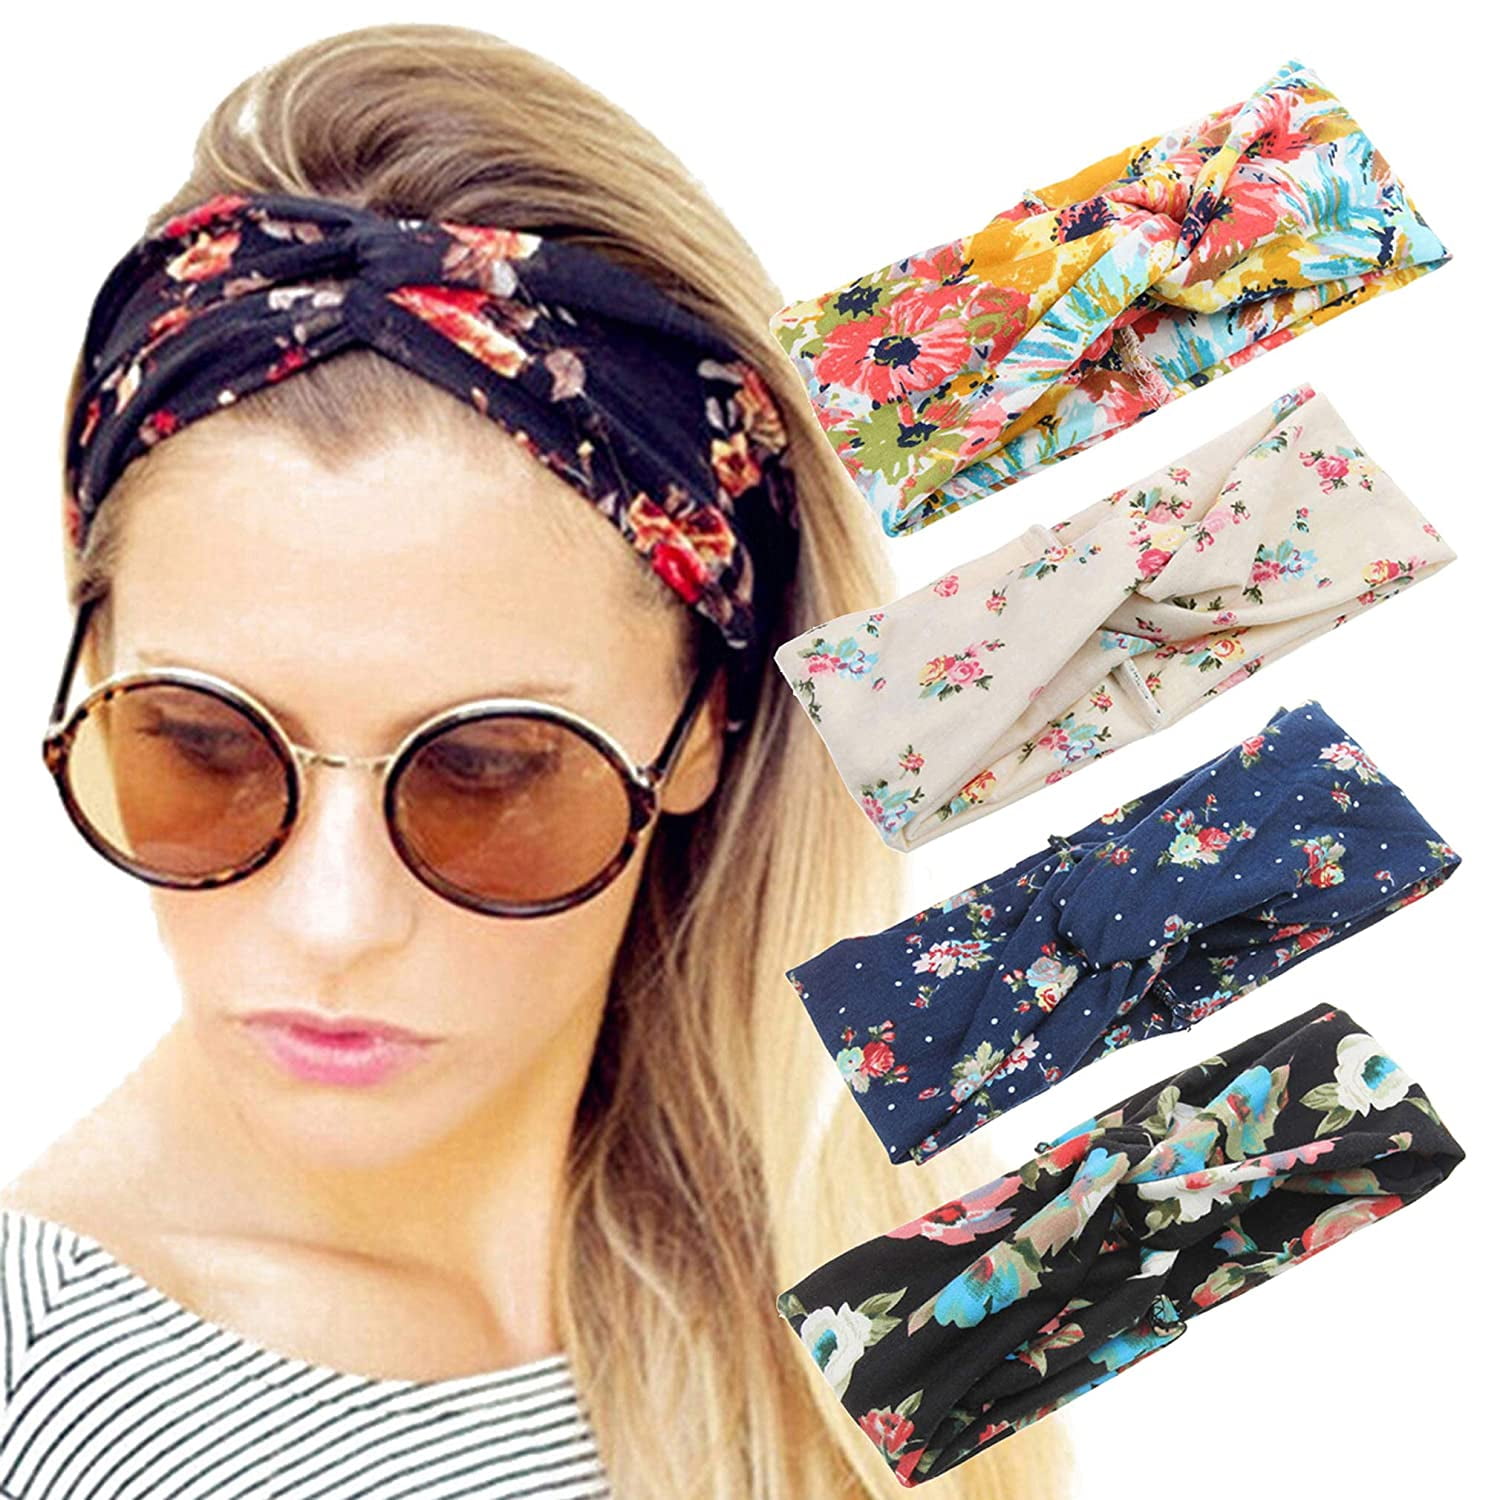 Headband 2 Ways: Teal Floral Headband  Stretchy running  Nurse Gifts athletic headband for yoga working out